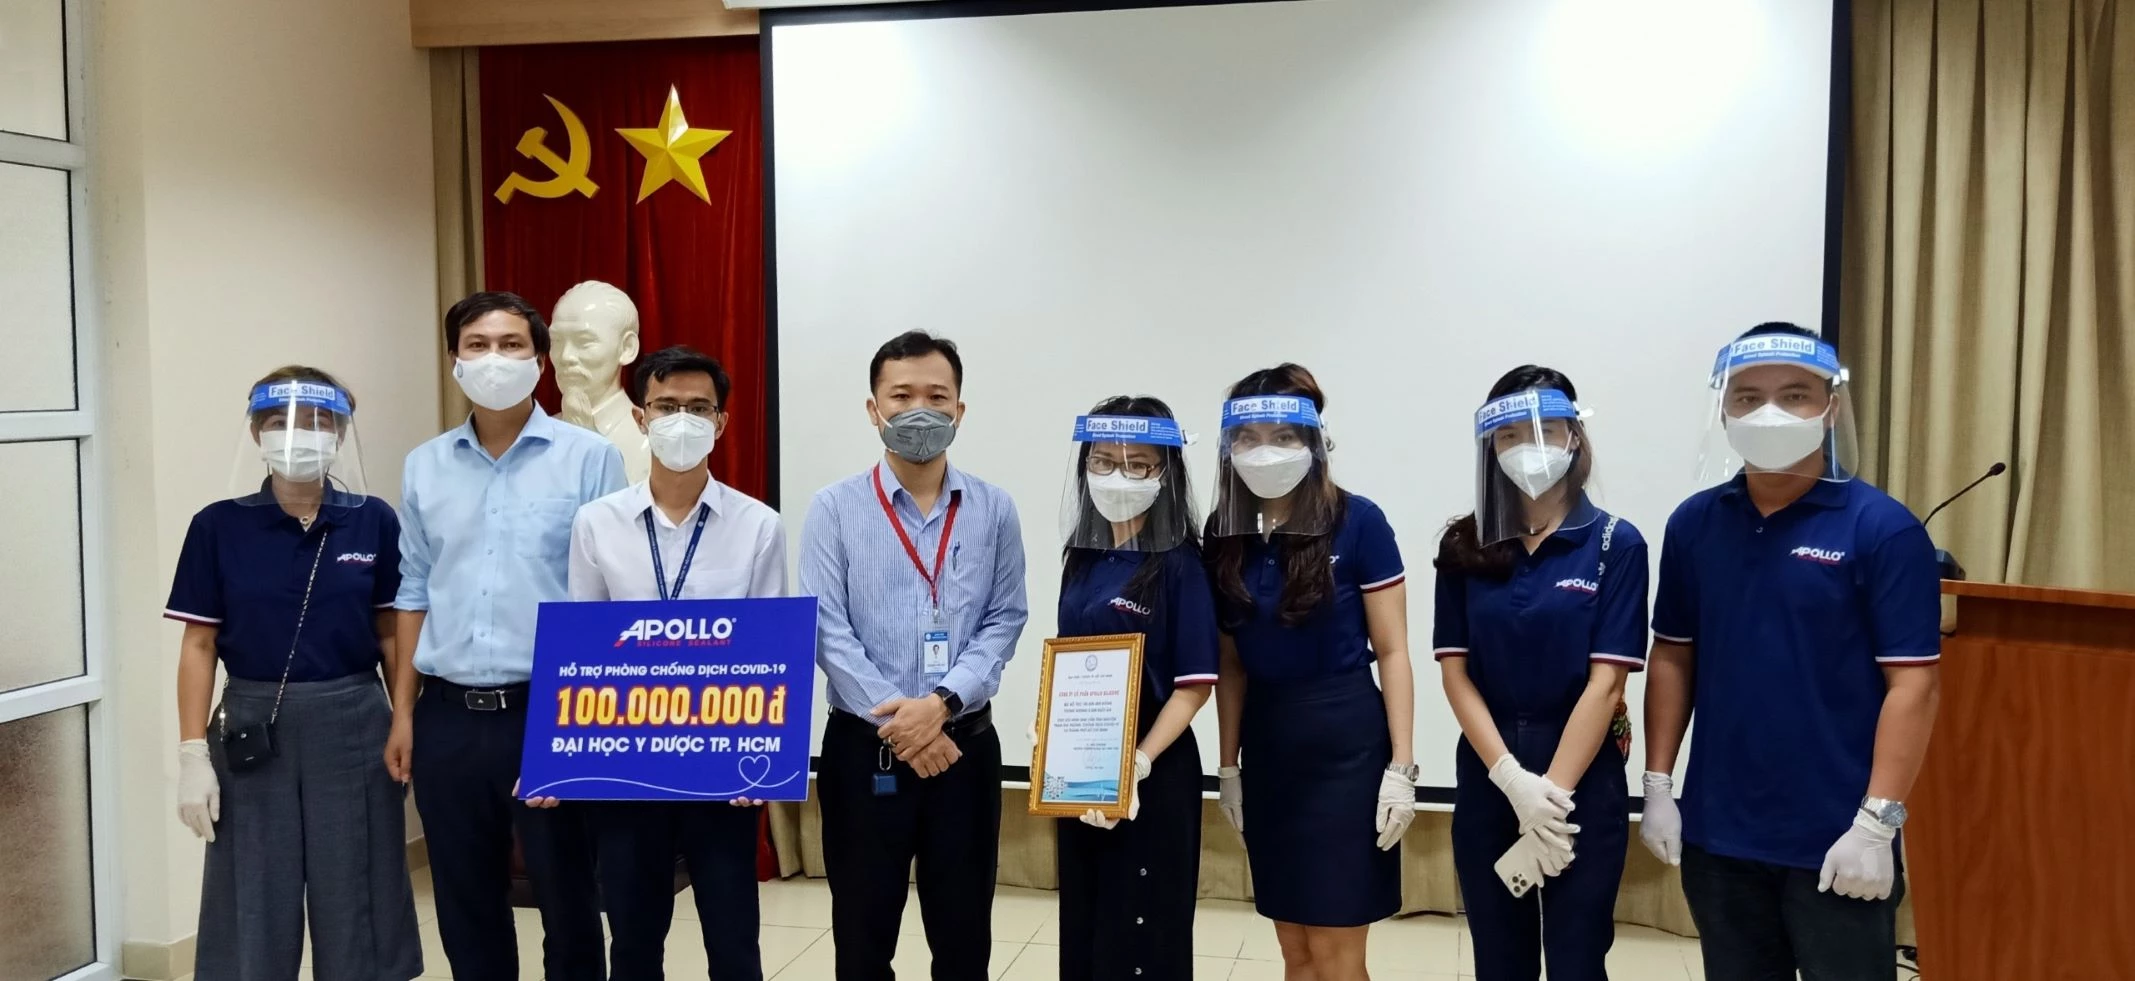 Apollo Silicone joins hands to volunteer with Ho Chi Minh City